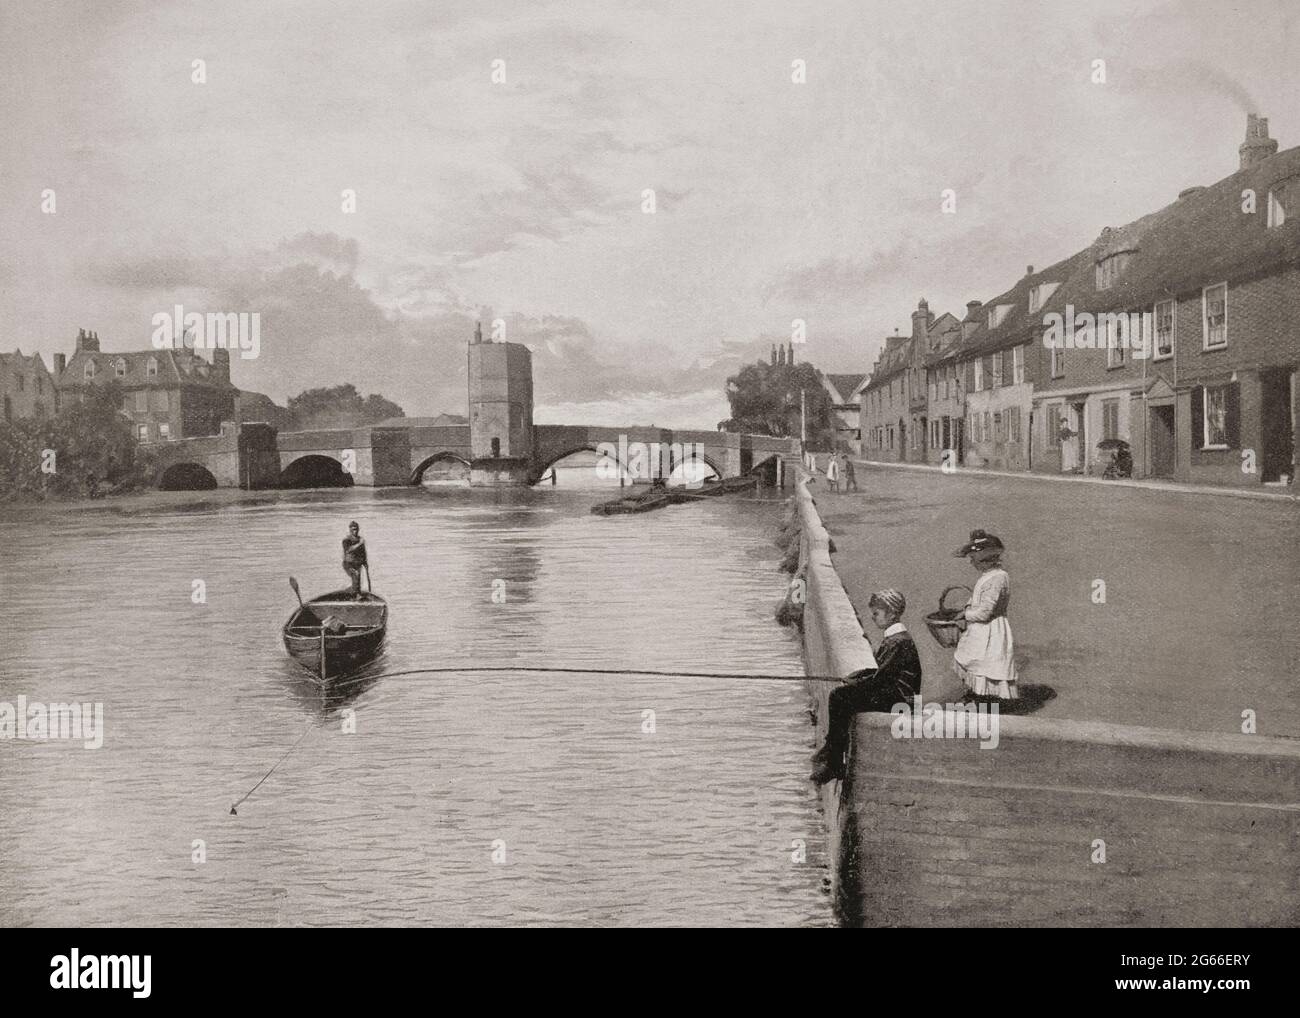 A late 19th century view of St Ives Bridge, completed in 1425, crossing the River Great Ouse in St Ives, Cambridgeshire, England with the bridge chapel in the centre. It went on to serve as a toll house, inn and private residence. Originally designed as a chapel and dedicated by the monks to Saint Leger, by 1736 it was being used as accommodation, and in that year two extra floors were added.During the 1850s and 1860s it was turned into a notorious public house named 'Little Hell', then a doctor's surgery. Stock Photo